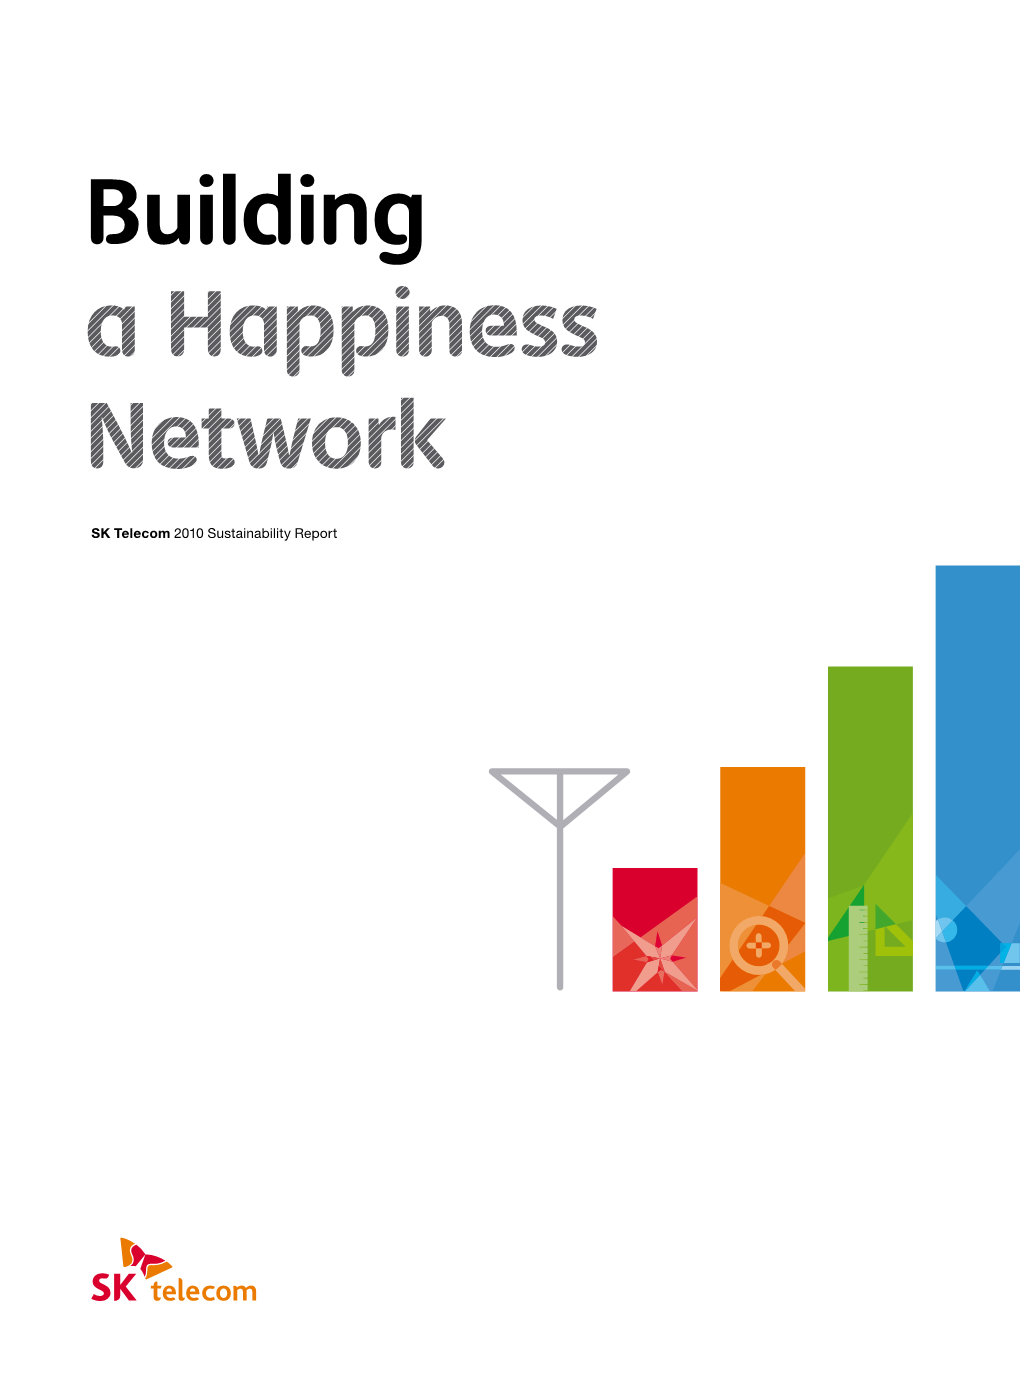 Building a Happiness Network